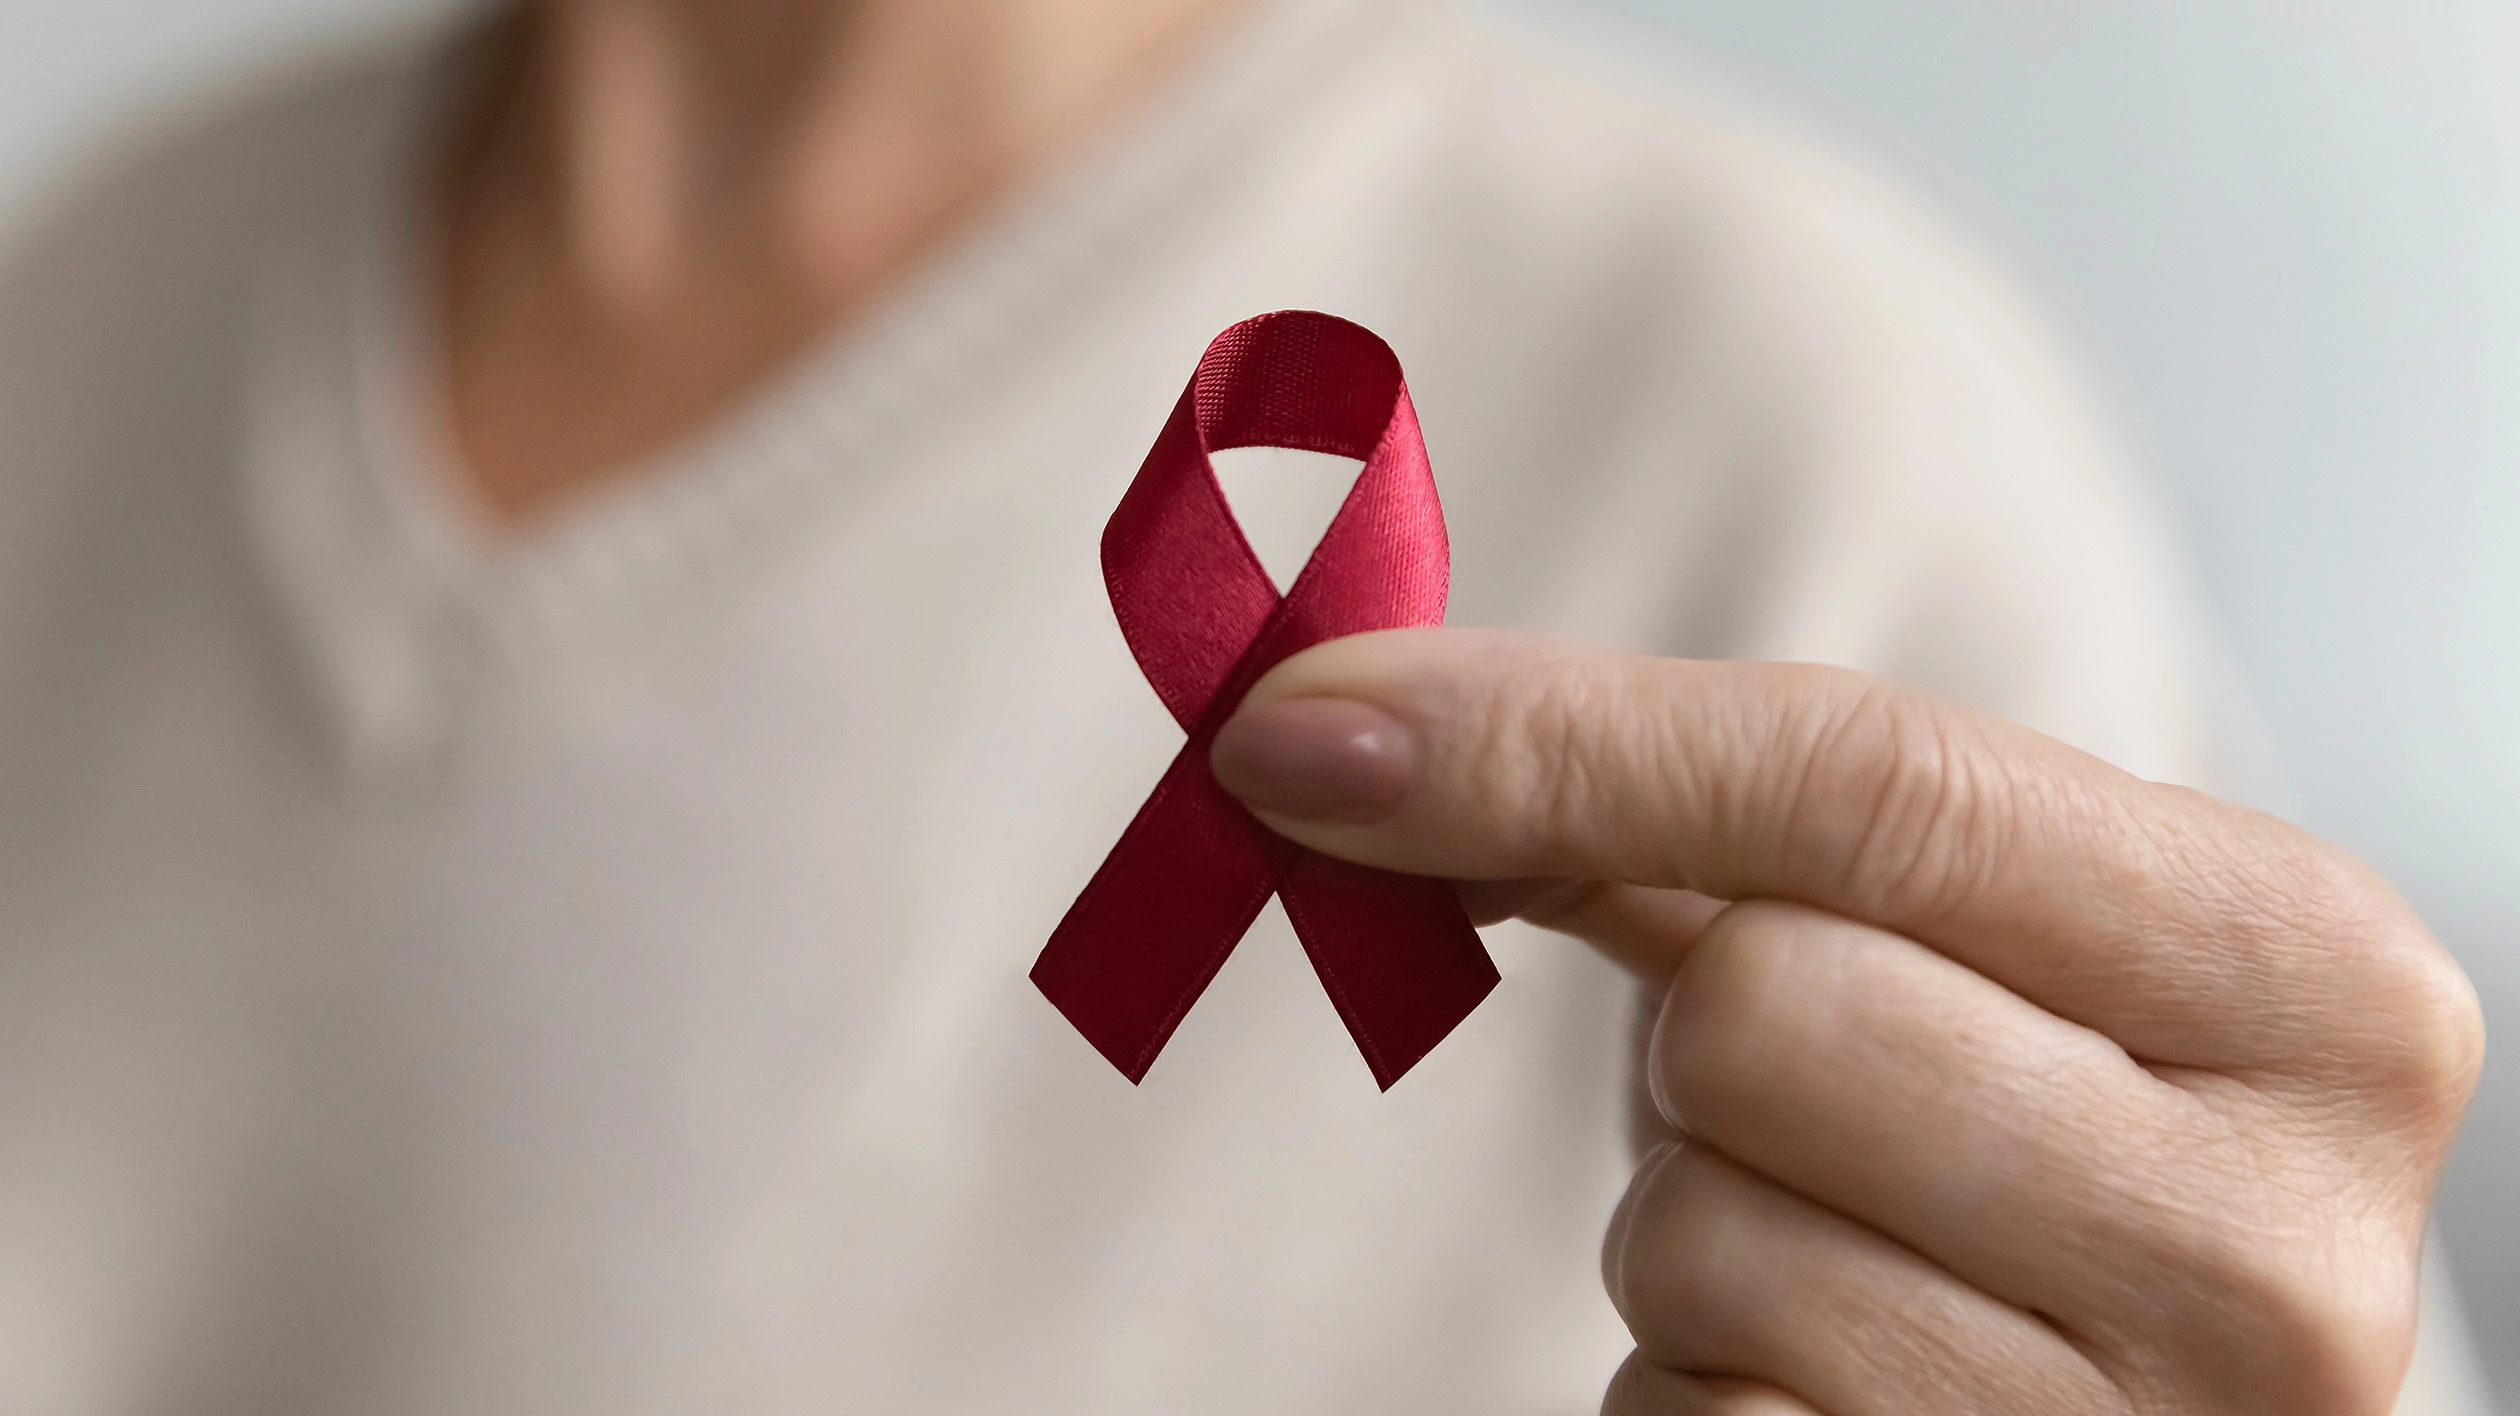 One thumb and one index finger hold a red AIDS ribbon.